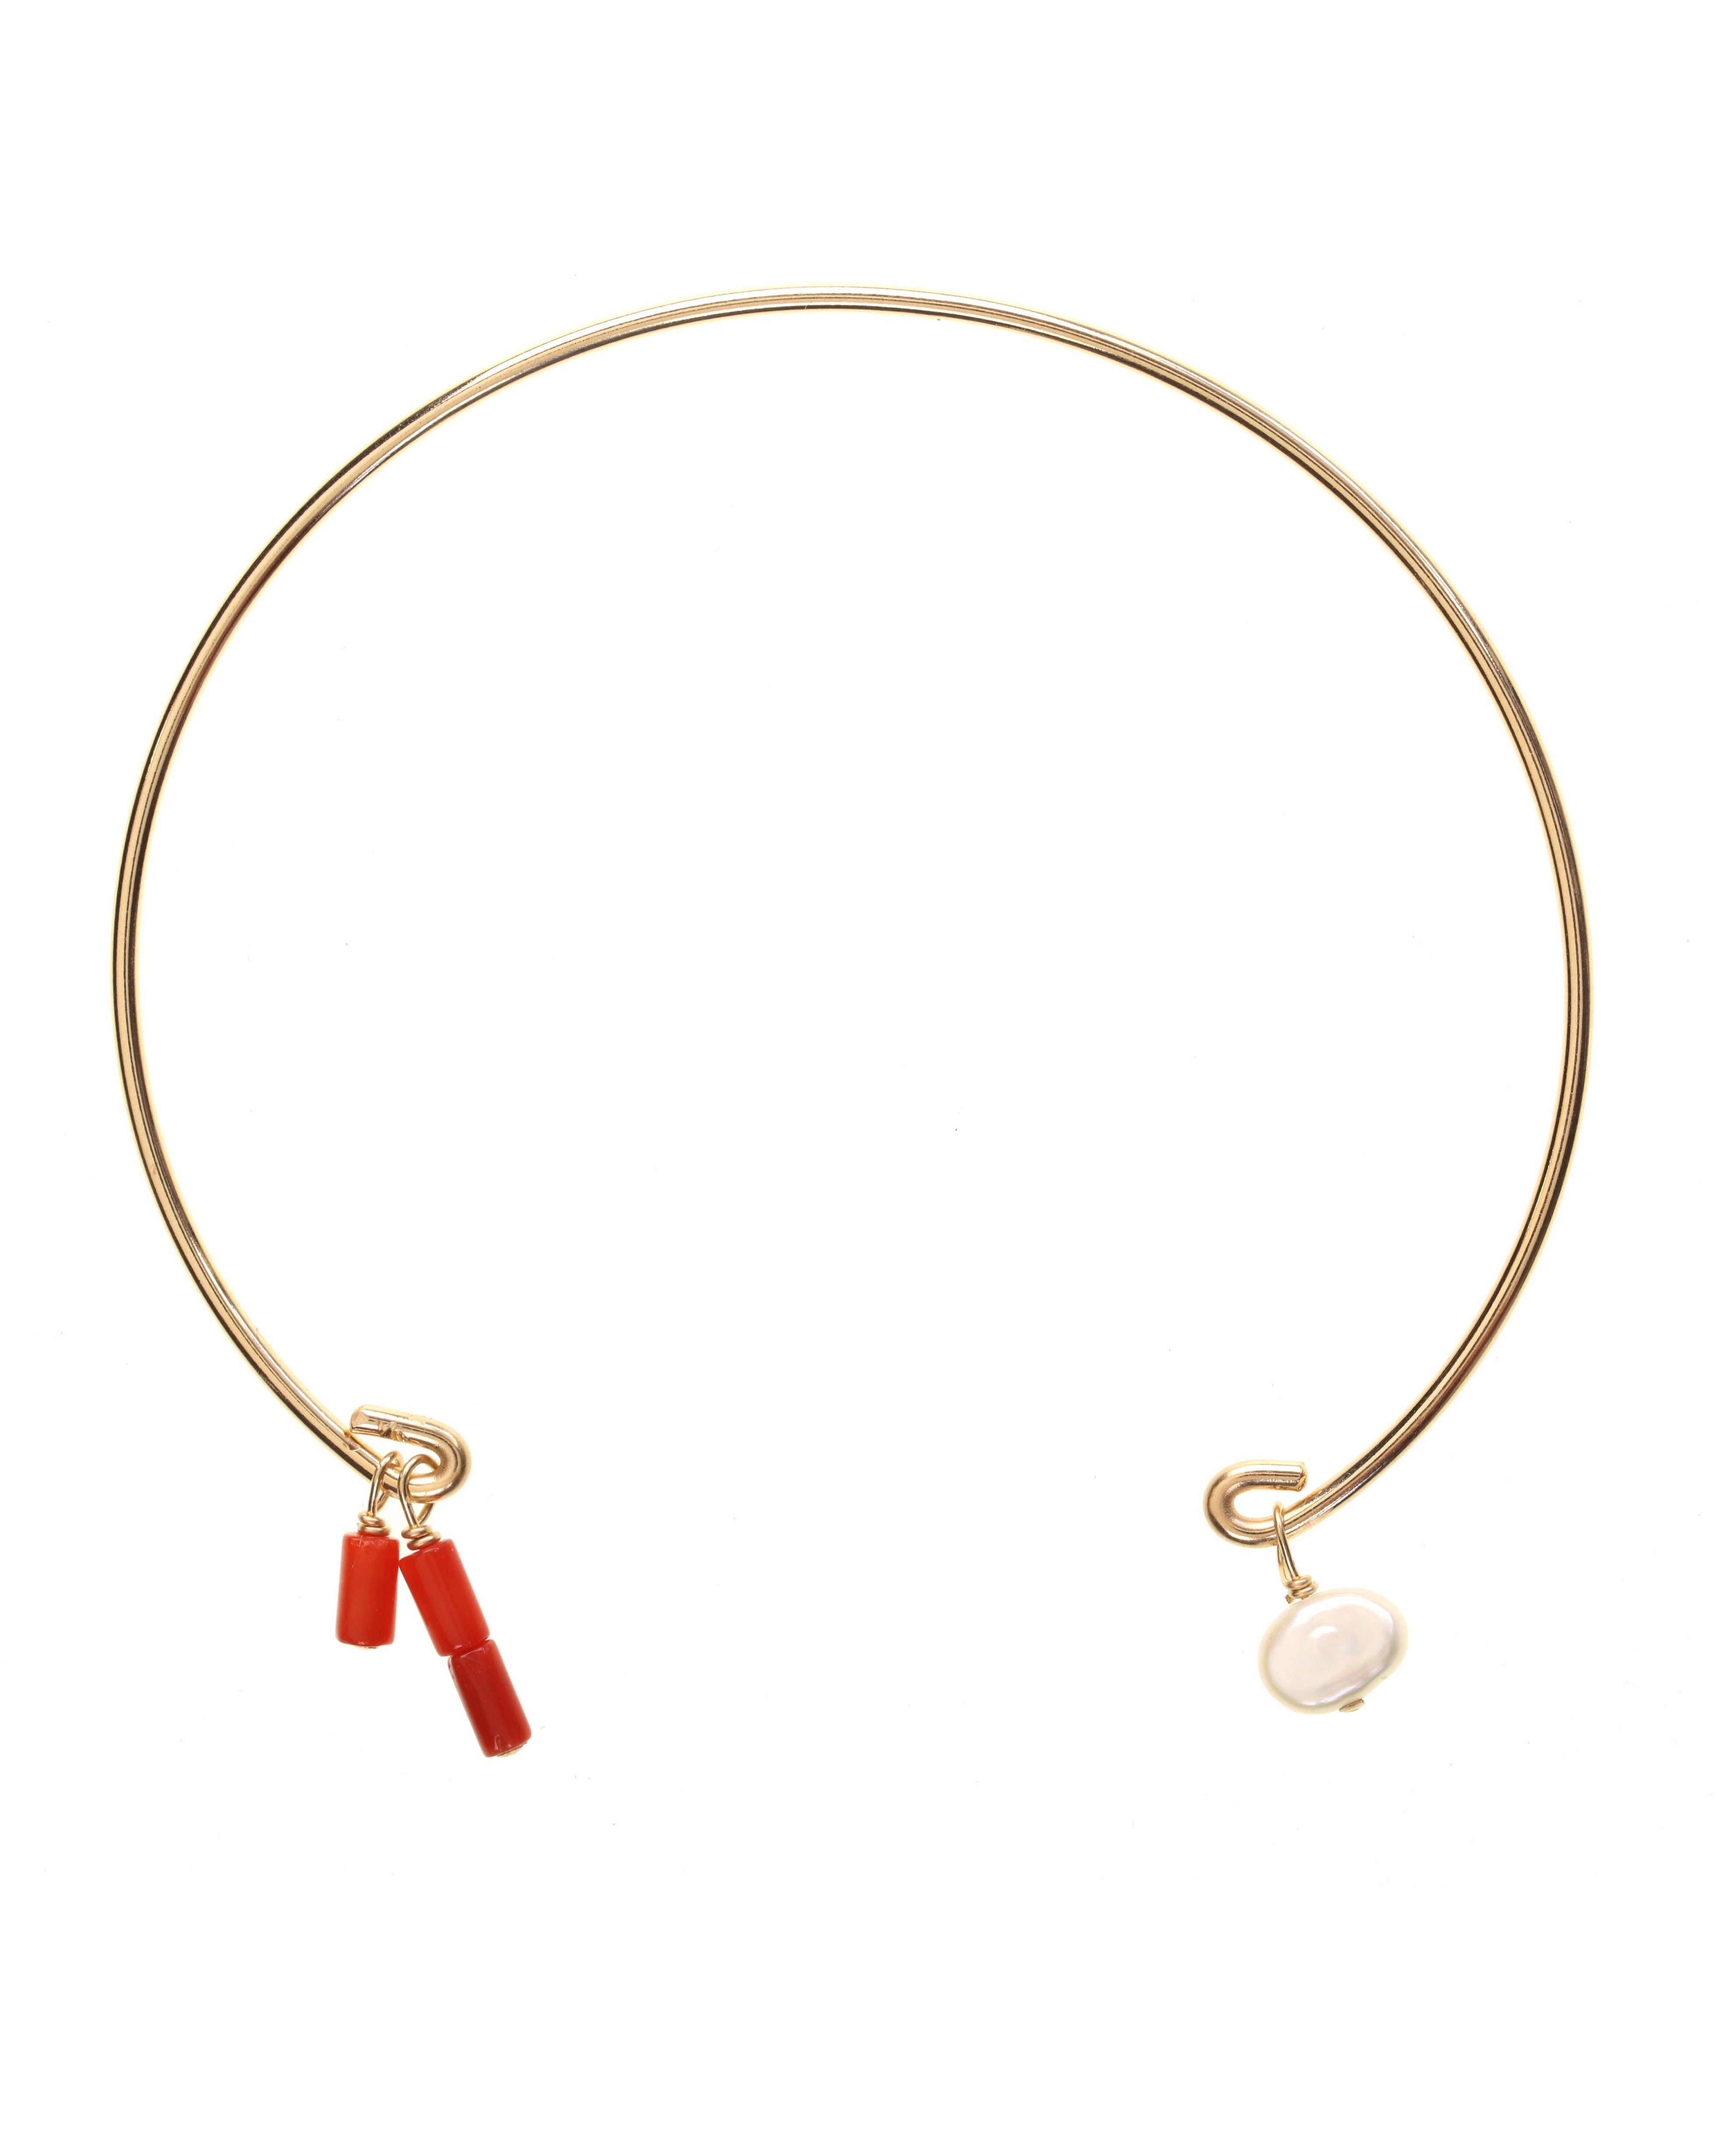 Rella Bracelet by KOZAKH. A bangle bracelet that fits a wrist of 6 to 8 inches, crafted in 14K Gold Filled, featuring dyed red coral tubes and a white irregular Pearl.